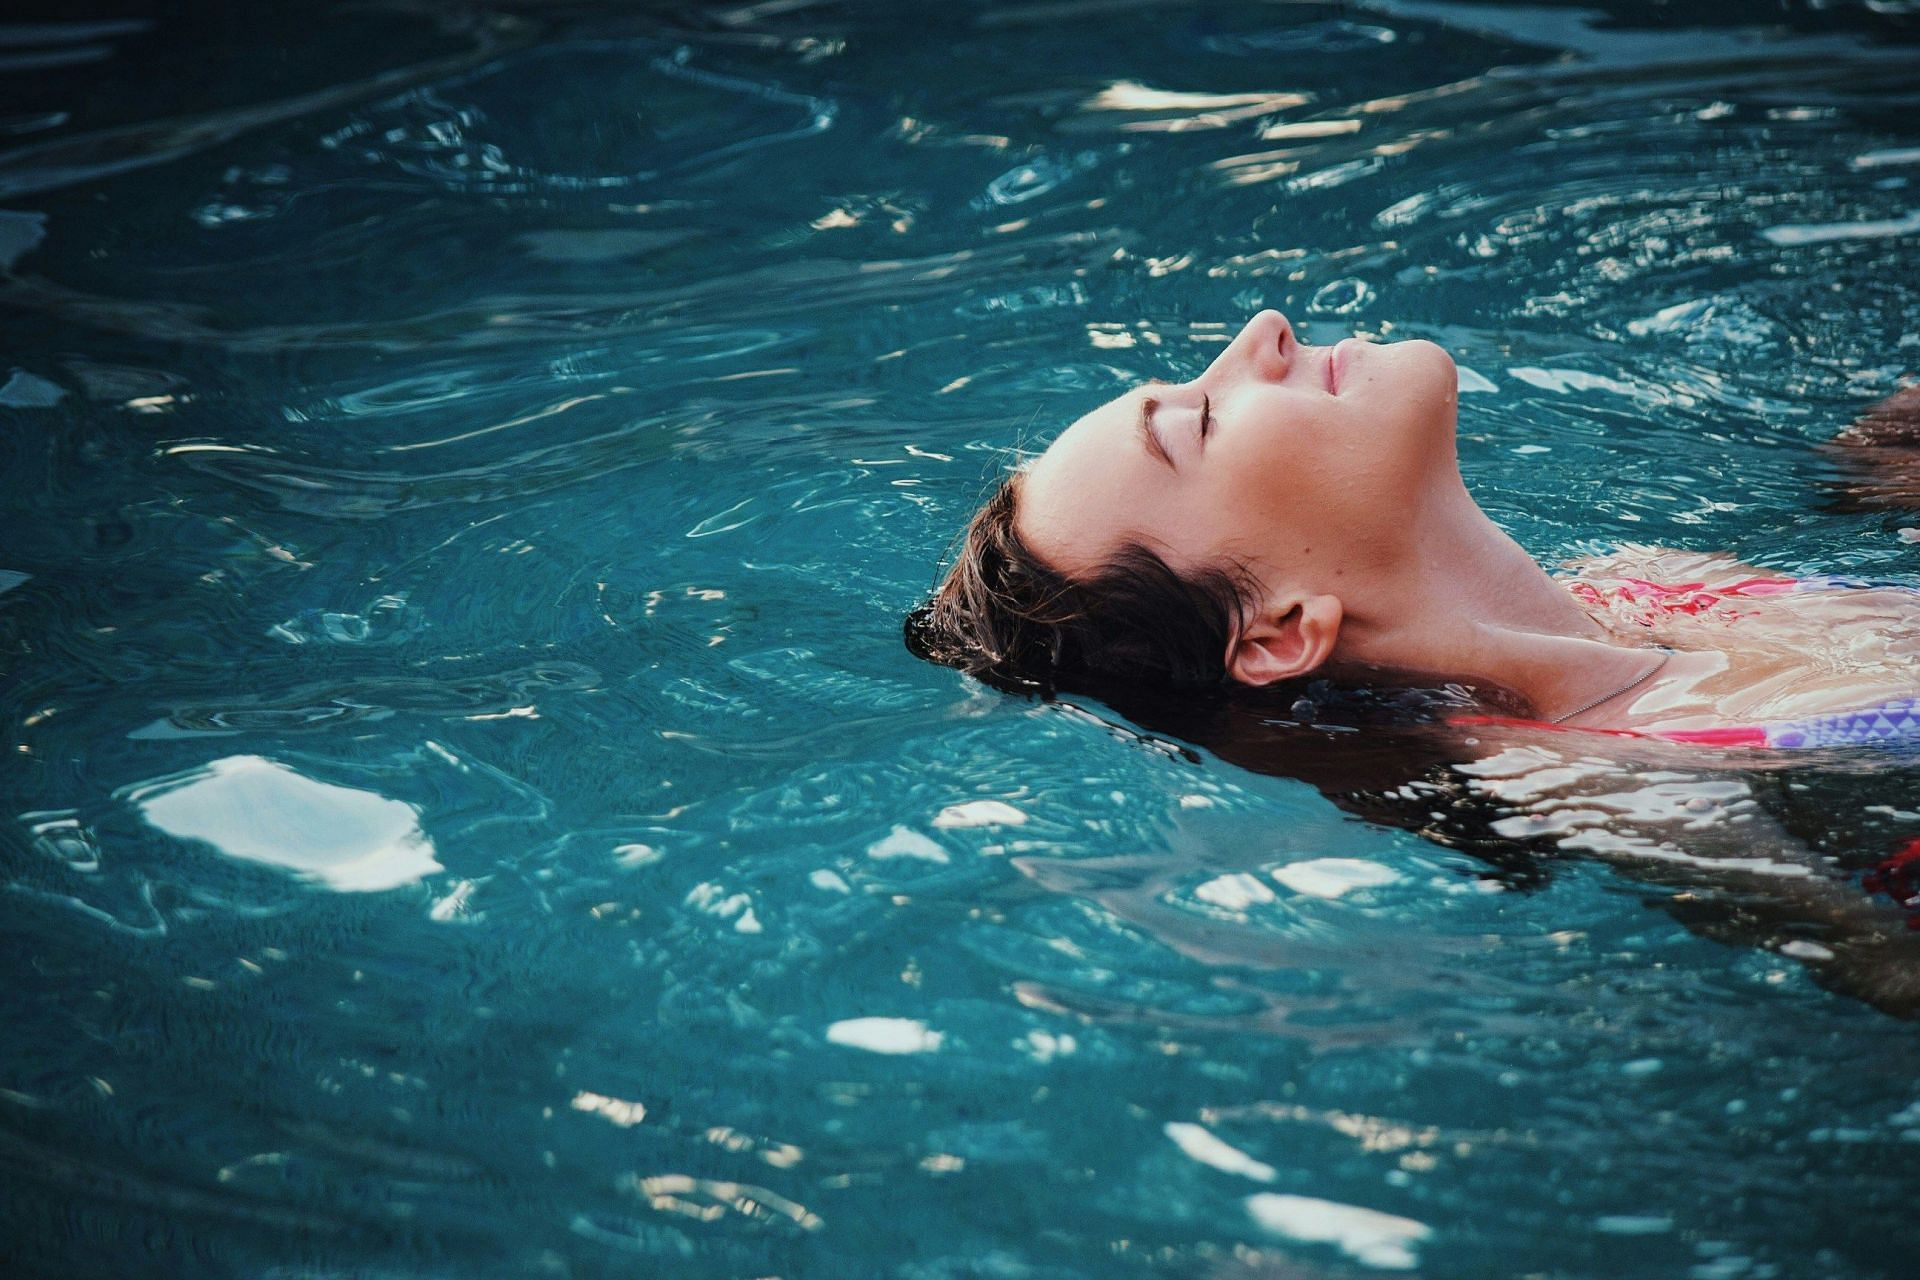 Swimming can help in burning 1000 calories a day (Image by Haley Phelps/Unsplash)